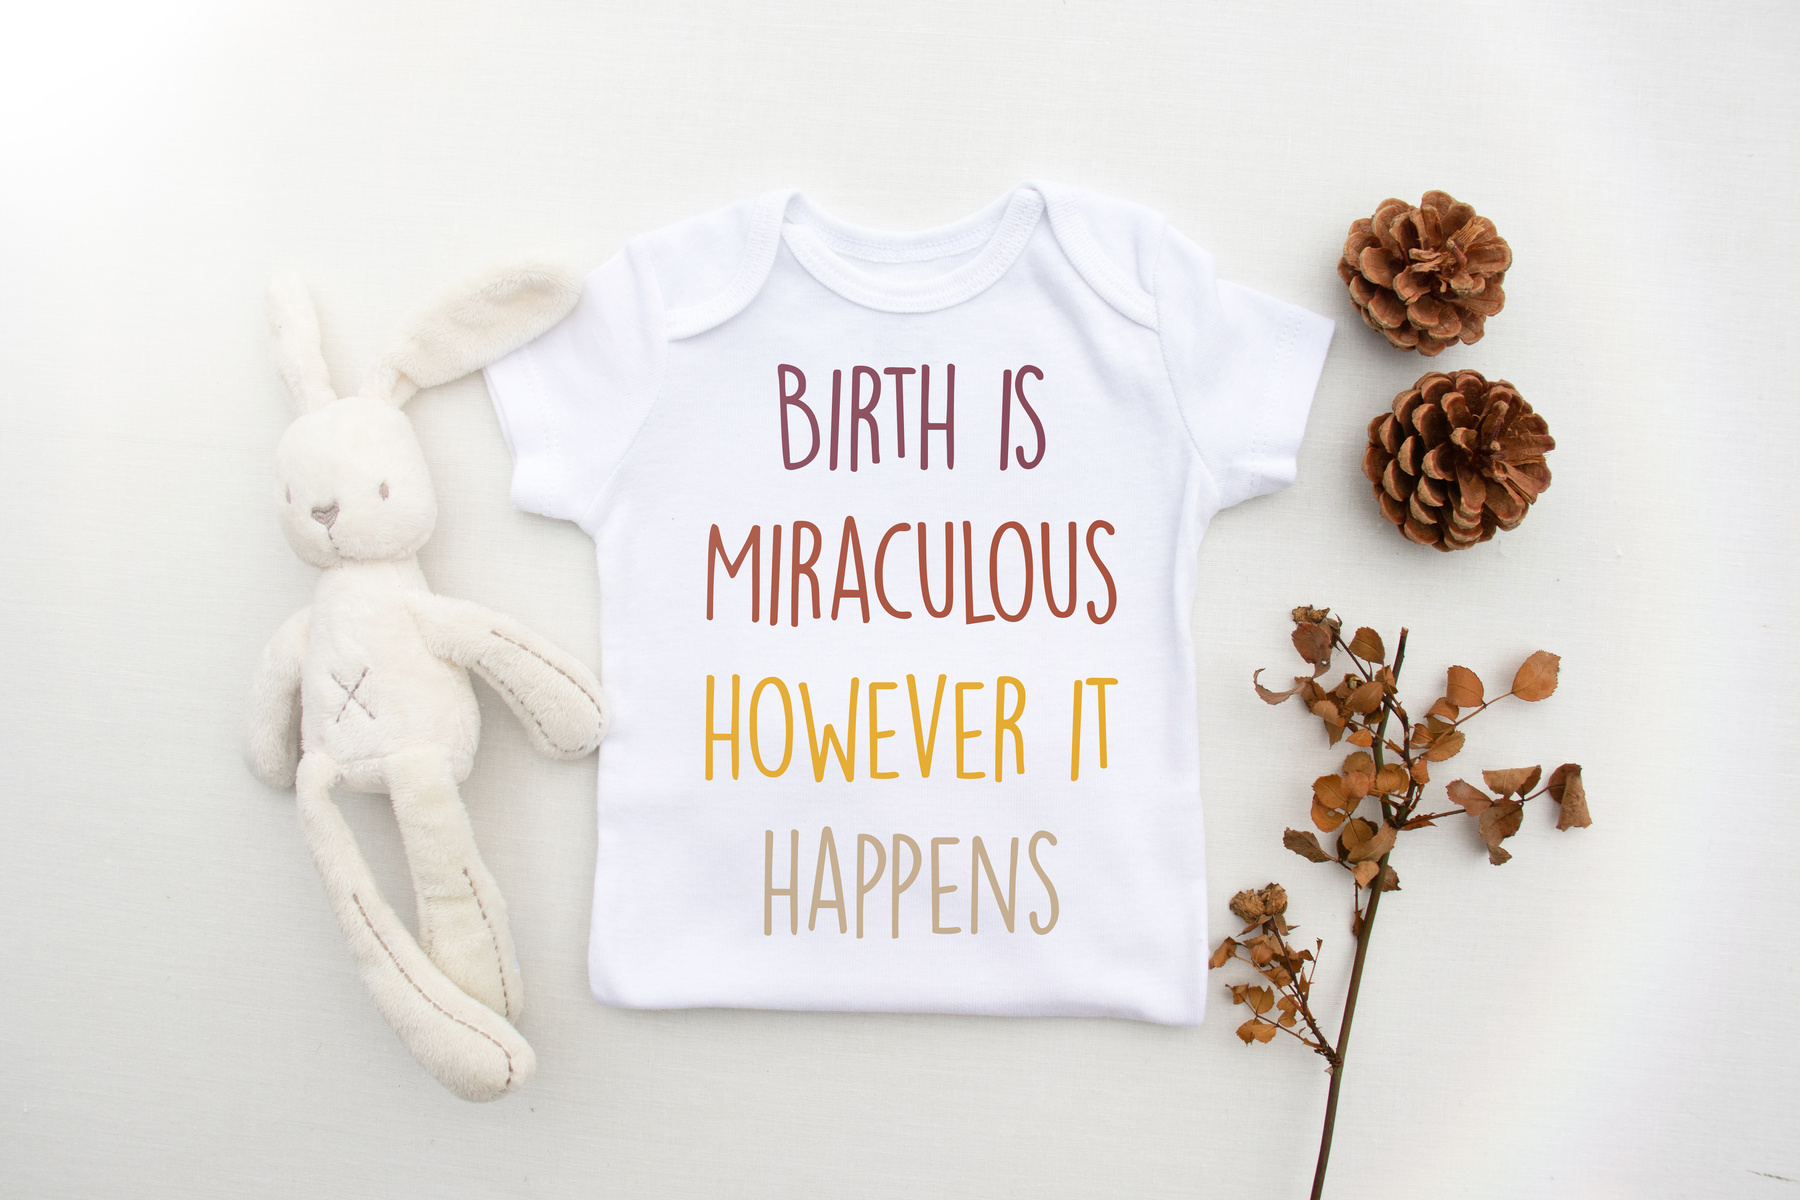 "Birth is miraculous however it happens" - Positive Birth Affirmation